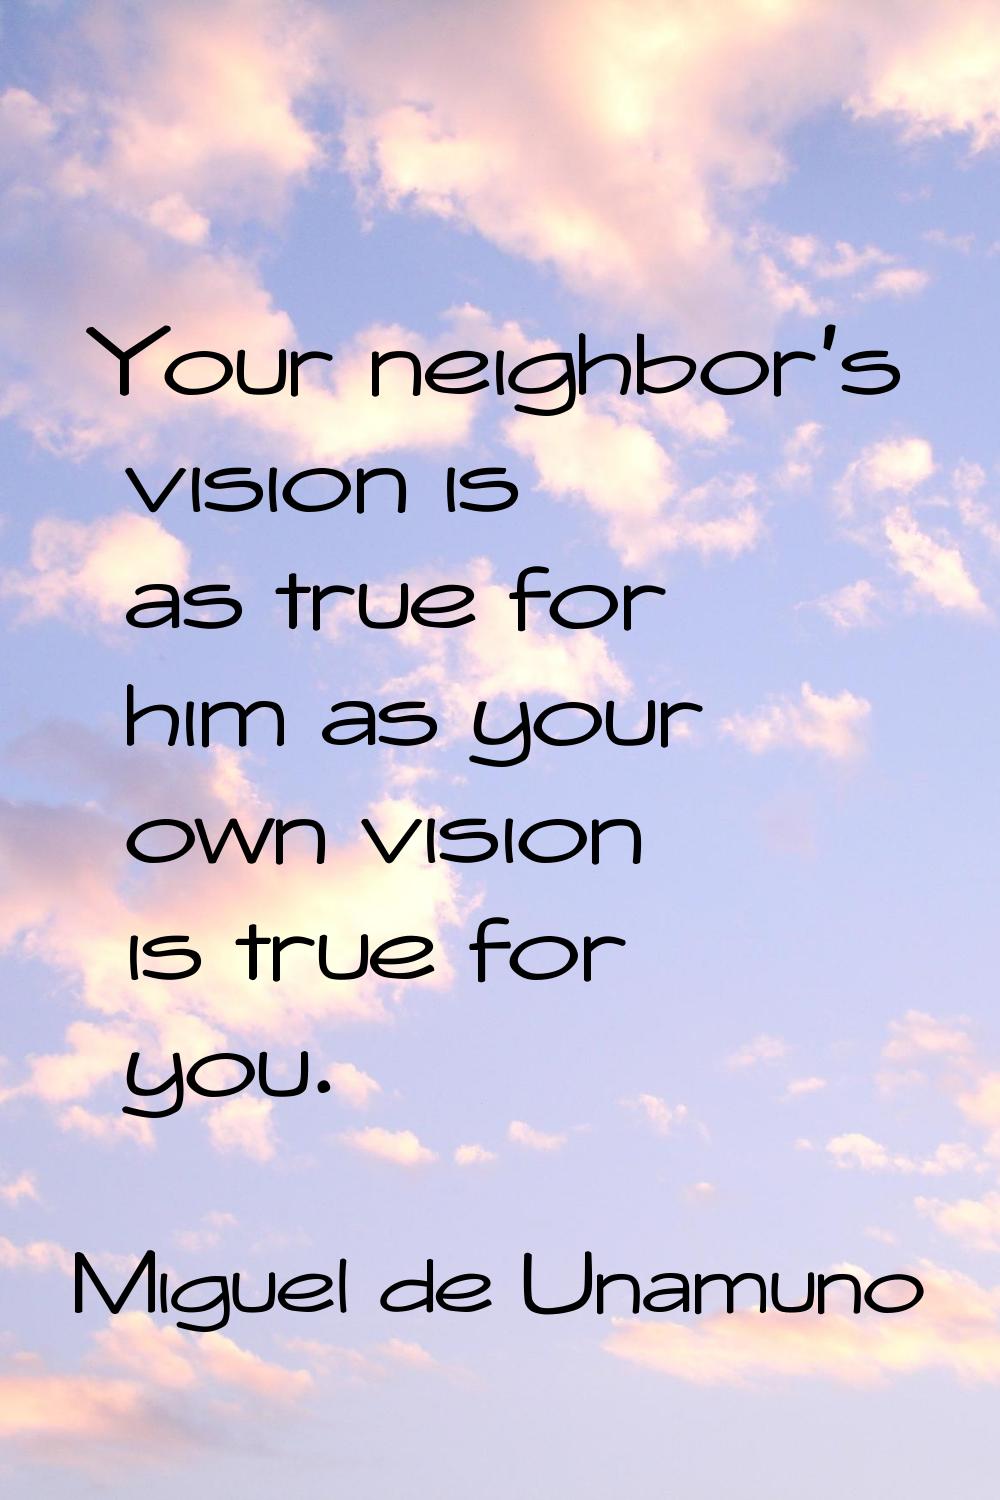 Your neighbor's vision is as true for him as your own vision is true for you.